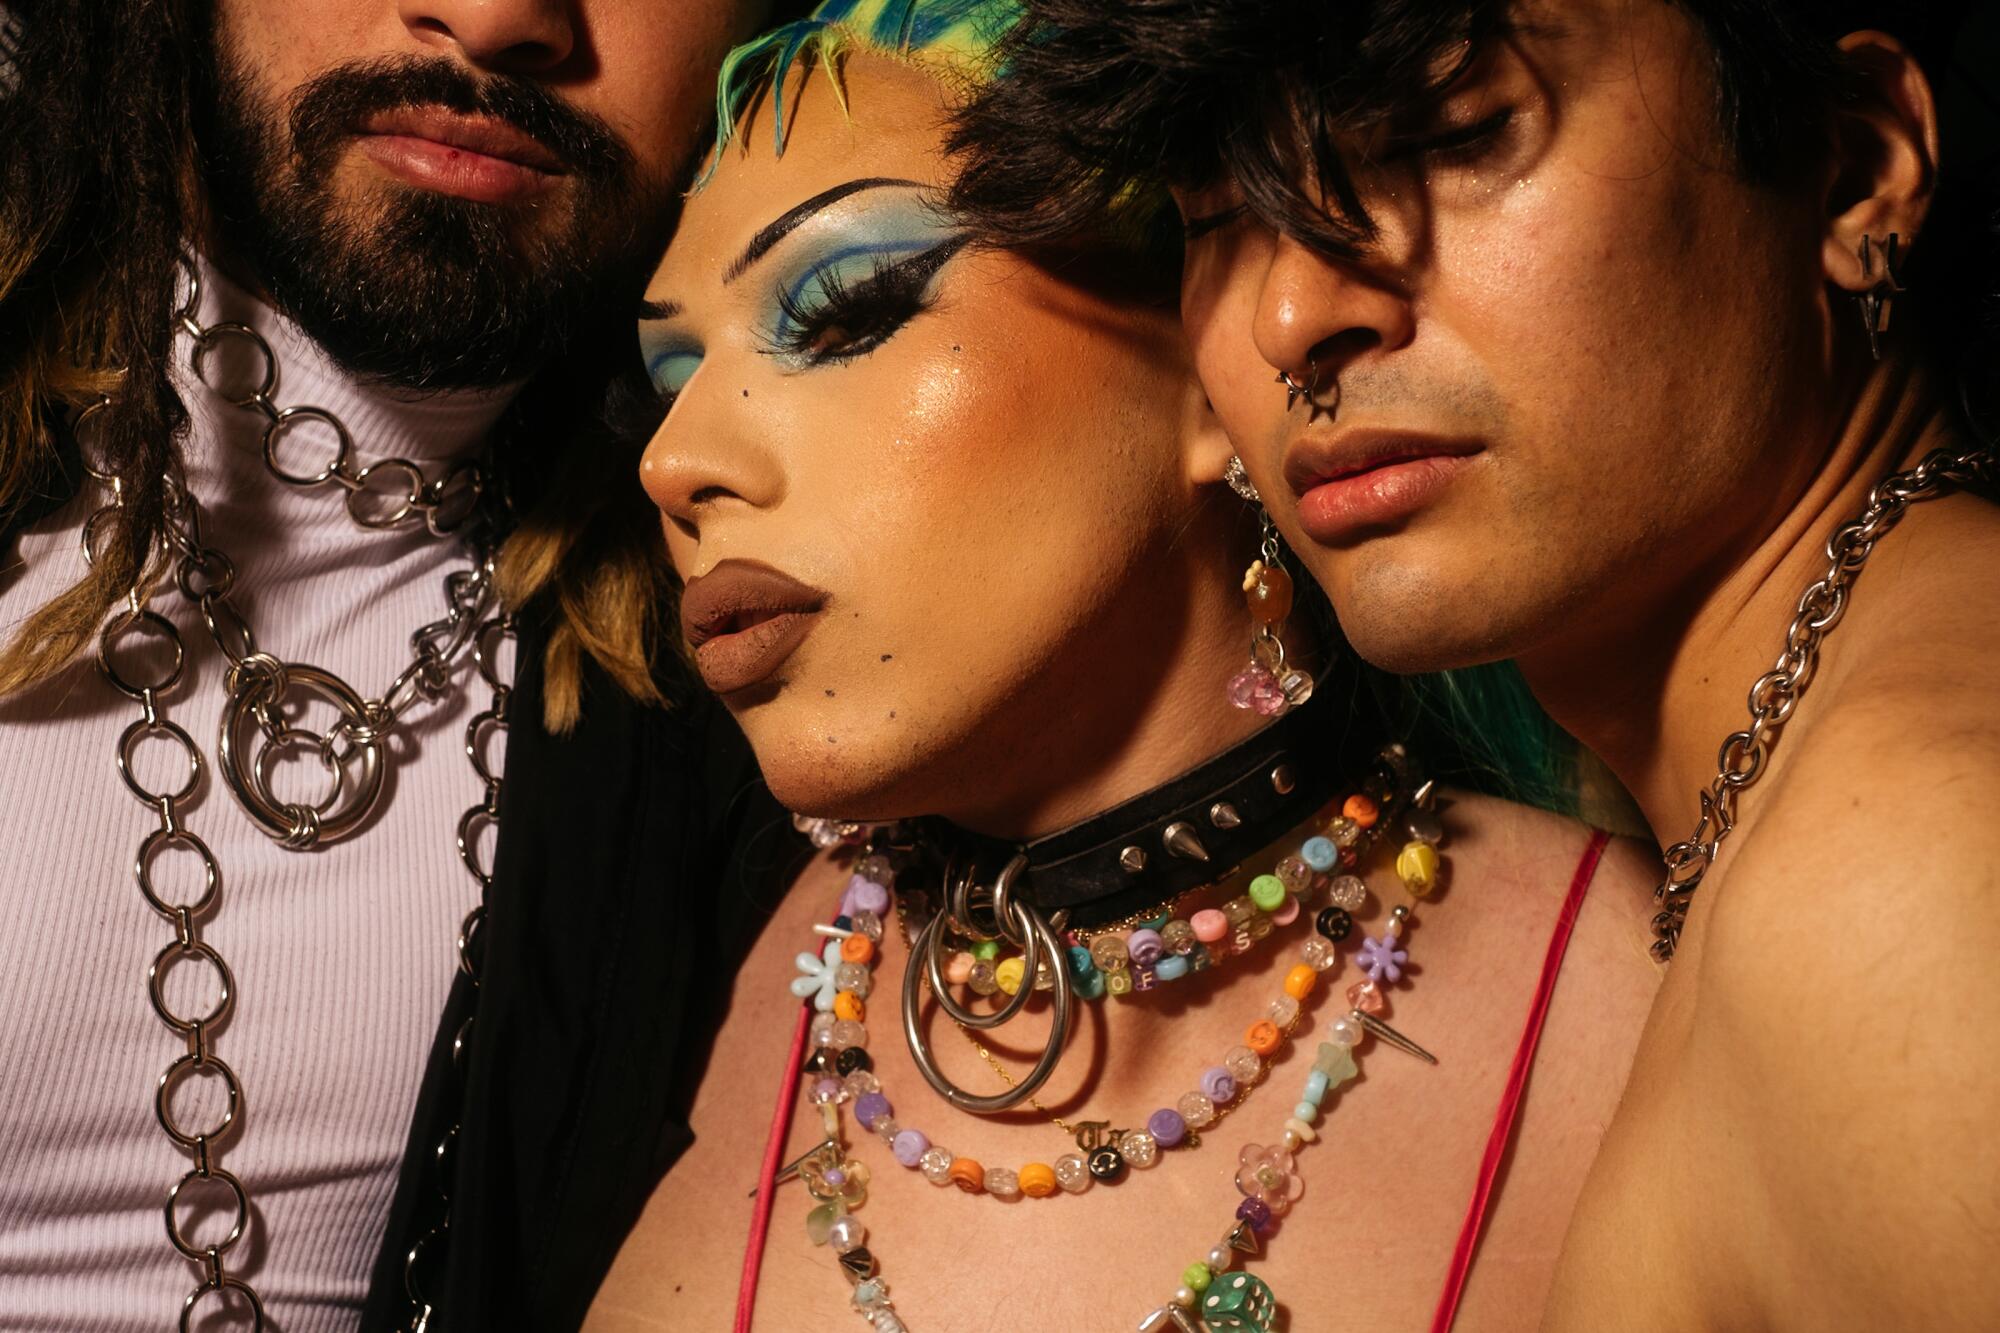 A close up of three people wearing jewelry and makeup.